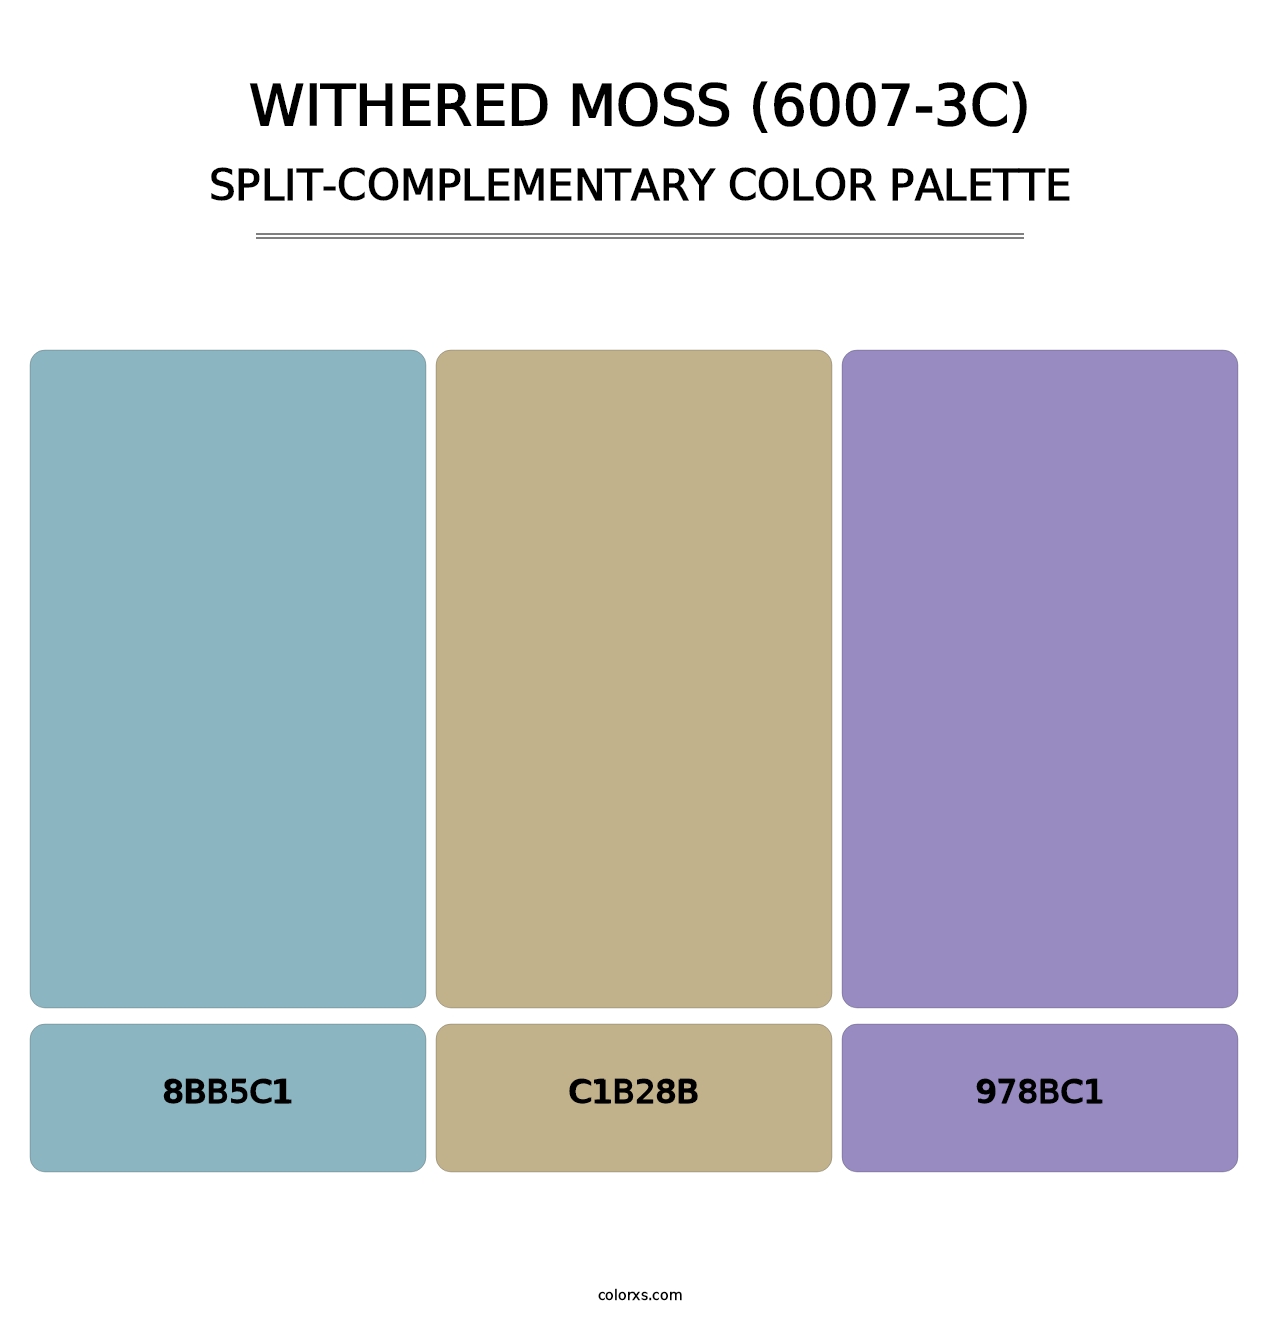 Withered Moss (6007-3C) - Split-Complementary Color Palette